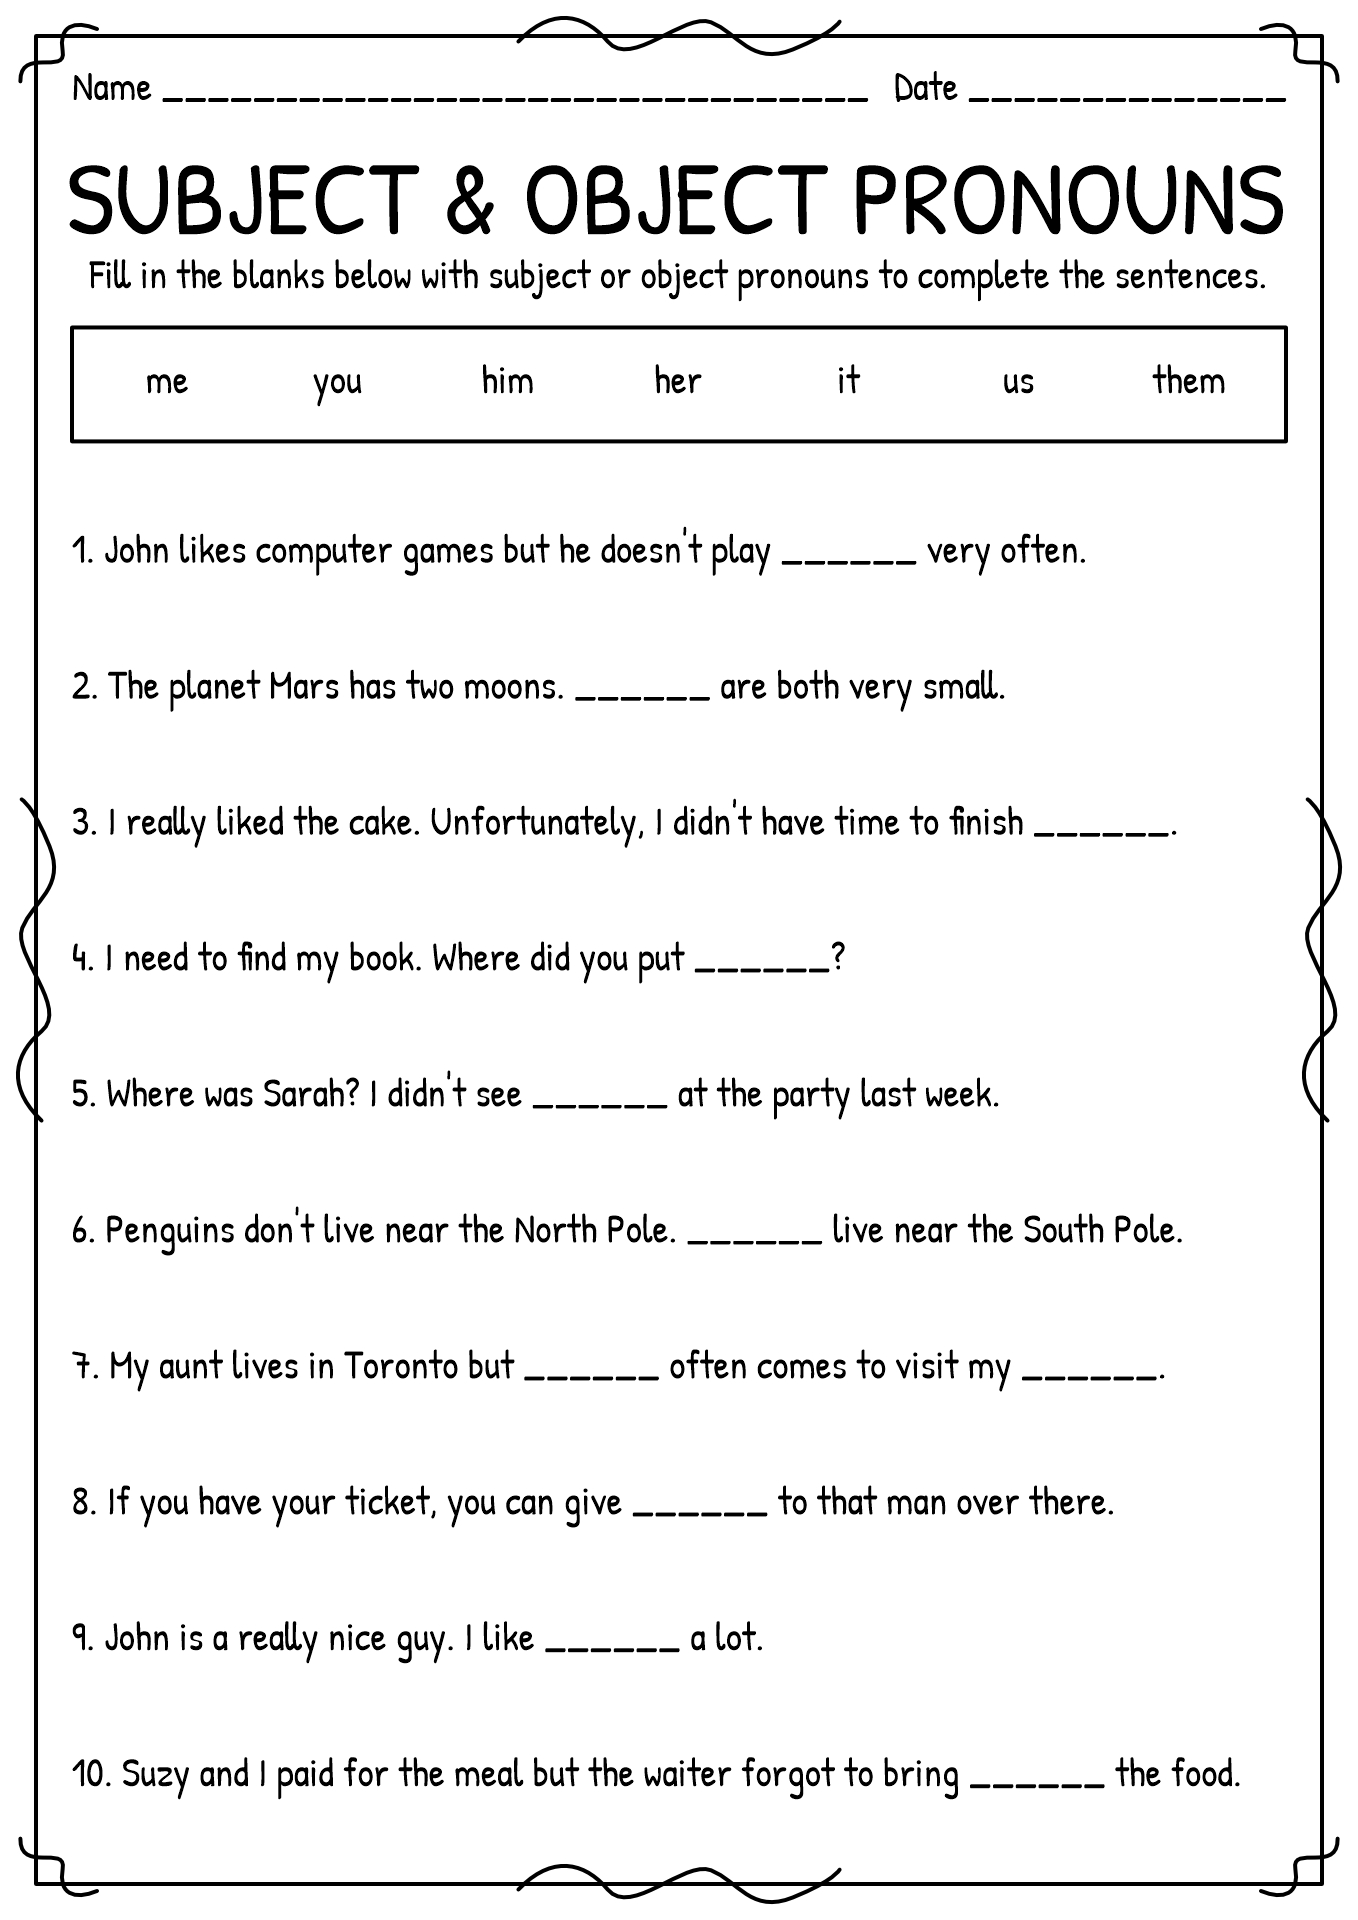 17-best-images-of-matching-worksheet-template-pdf-vocabulary-matching